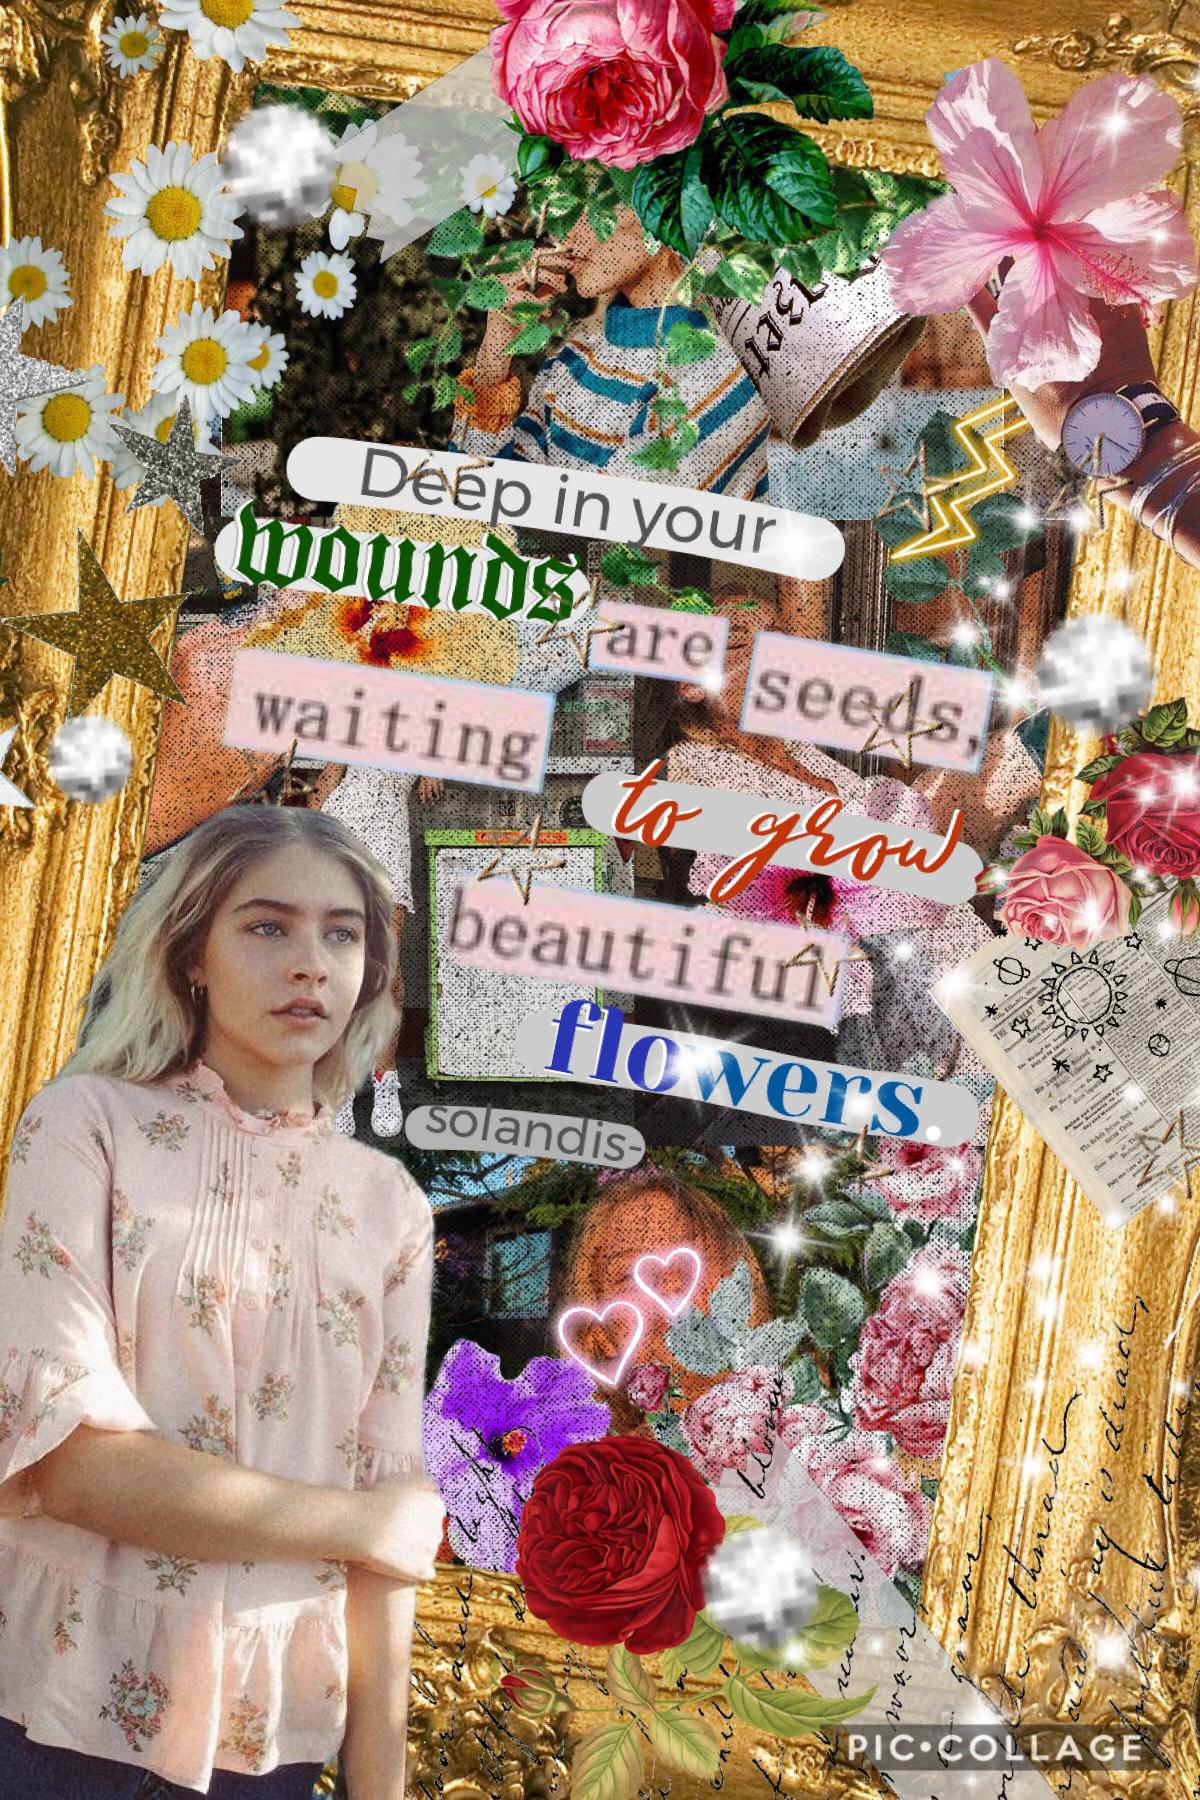 🌸☀️tappy☀️🌸 2.28.19.

hi y’all 🌤 this week is going by super slow for me 😫 So yeah I started. A new theme so first encouragement them collage ✨ Thank y’all dearly for 900 followers ♥️ QOTD: Greek or Roman AOTD: Greek (demigod) lol 😂 